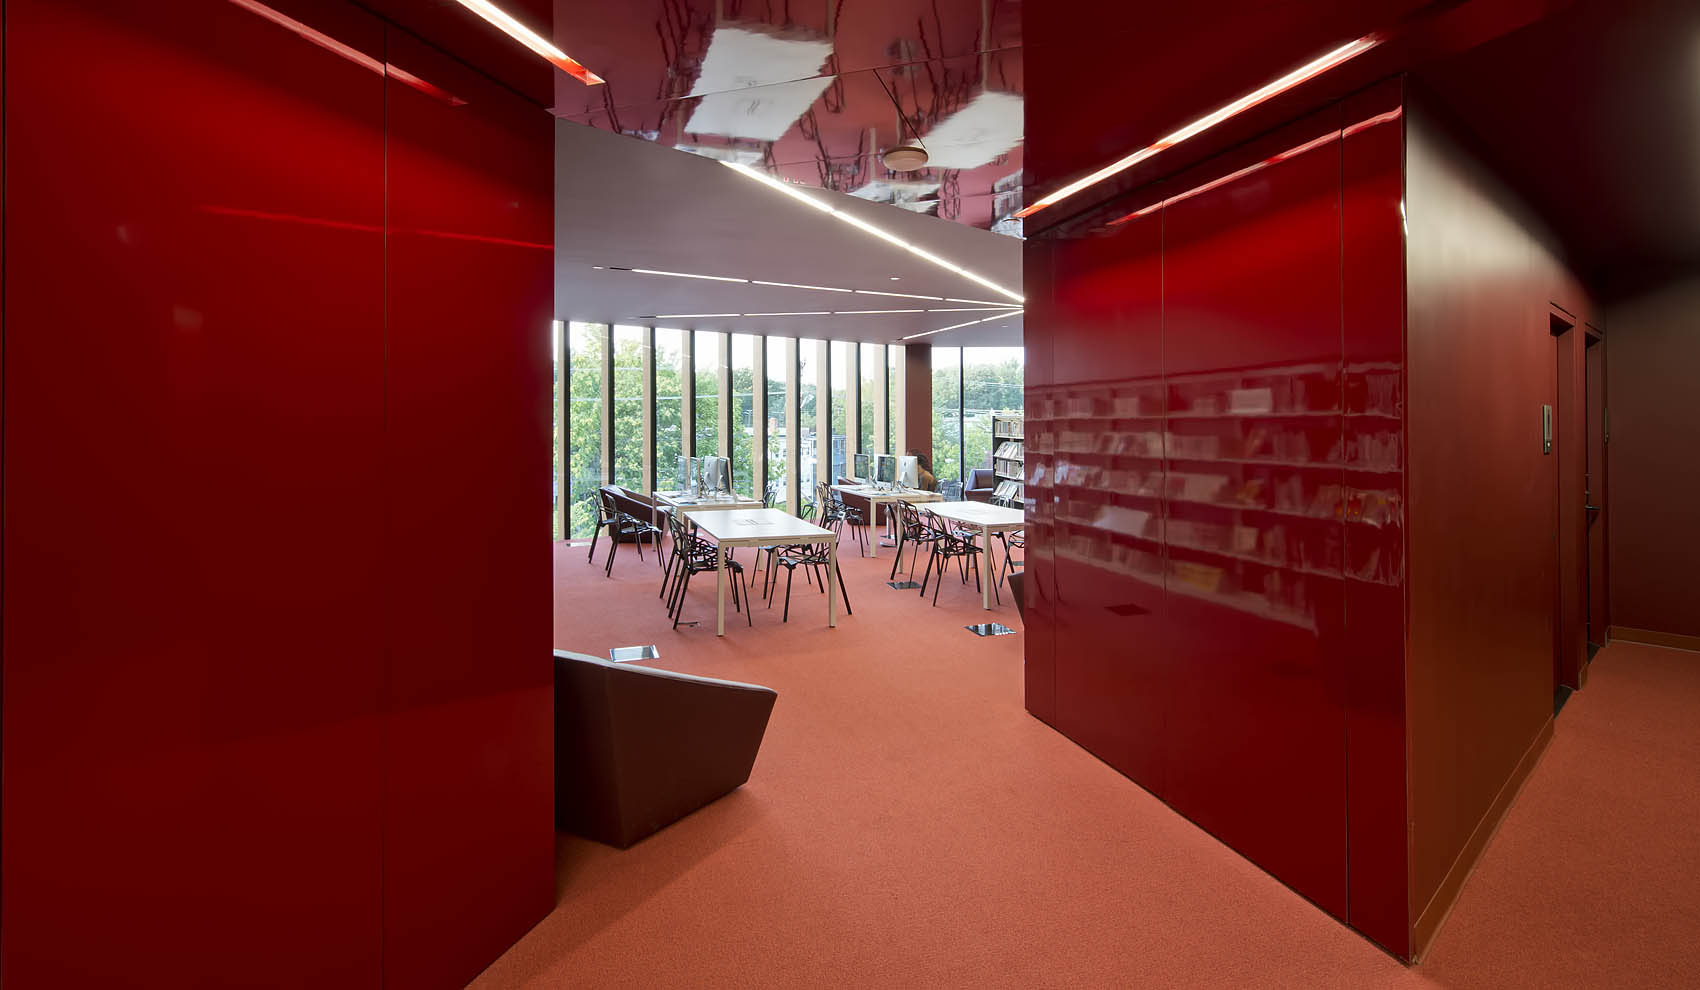 angled red walls lead into study area